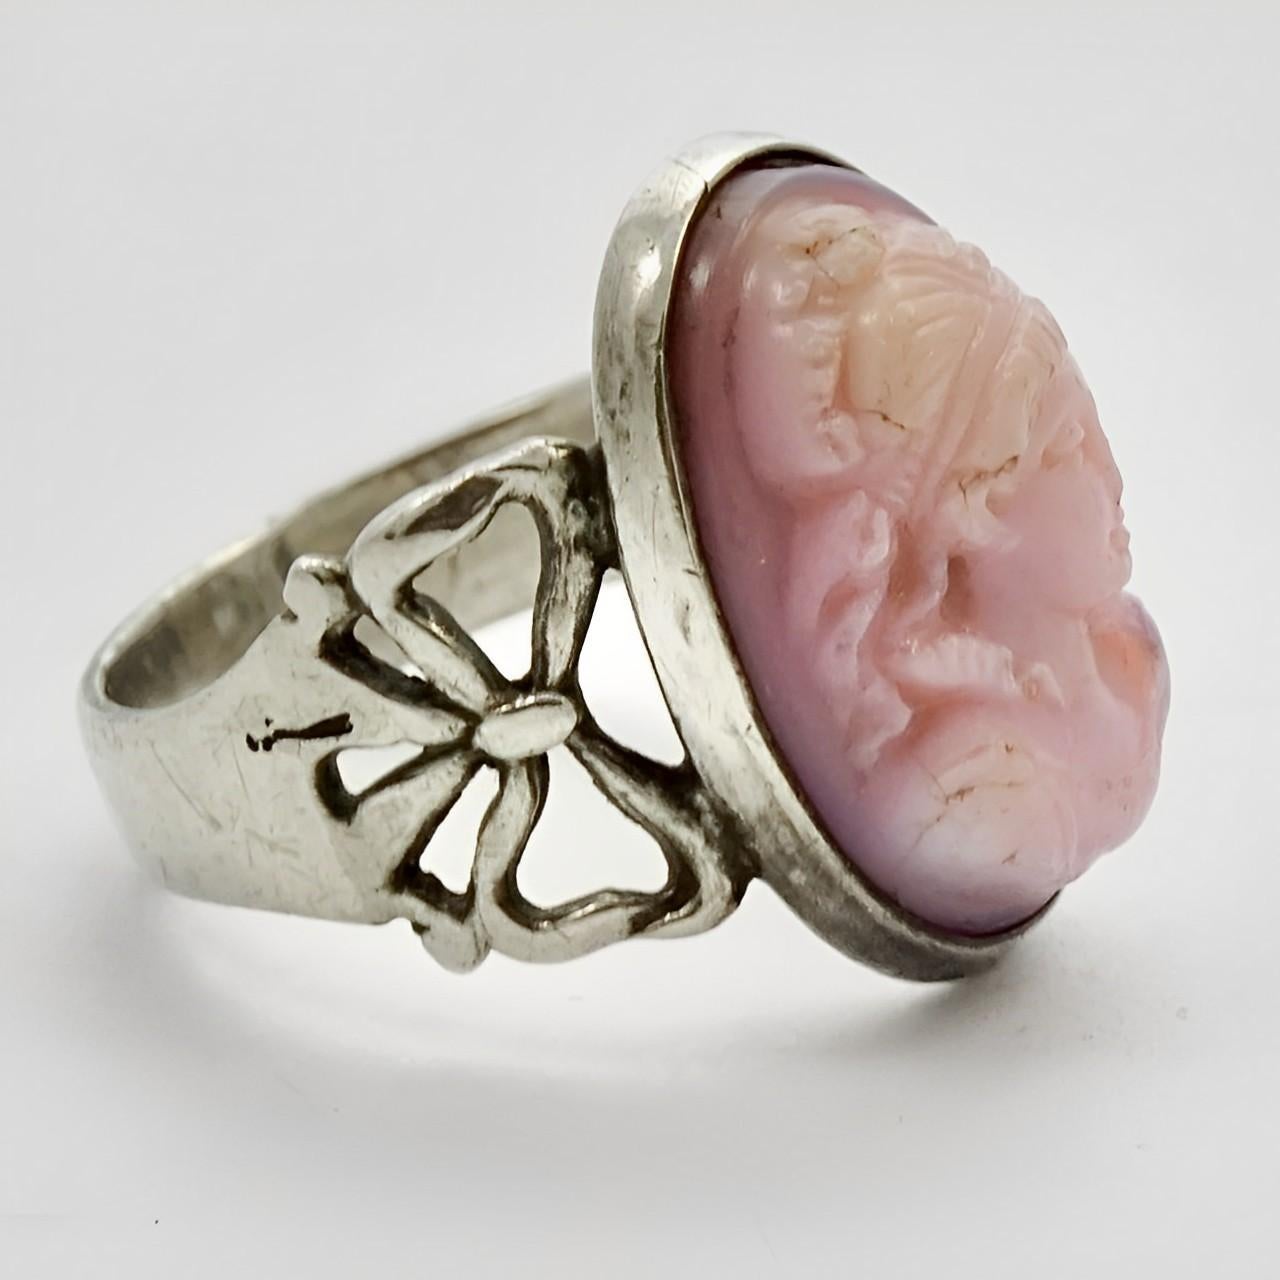 Lovely sterling silver and pink conch shell cameo ring, featuring bow design shoulders. Ring size UK I 1/2, US 4 1/2, and measuring diameter approximately 1.6 cm / .6 inch. There is scratching as expected, and the shell has some fine cracks.

This